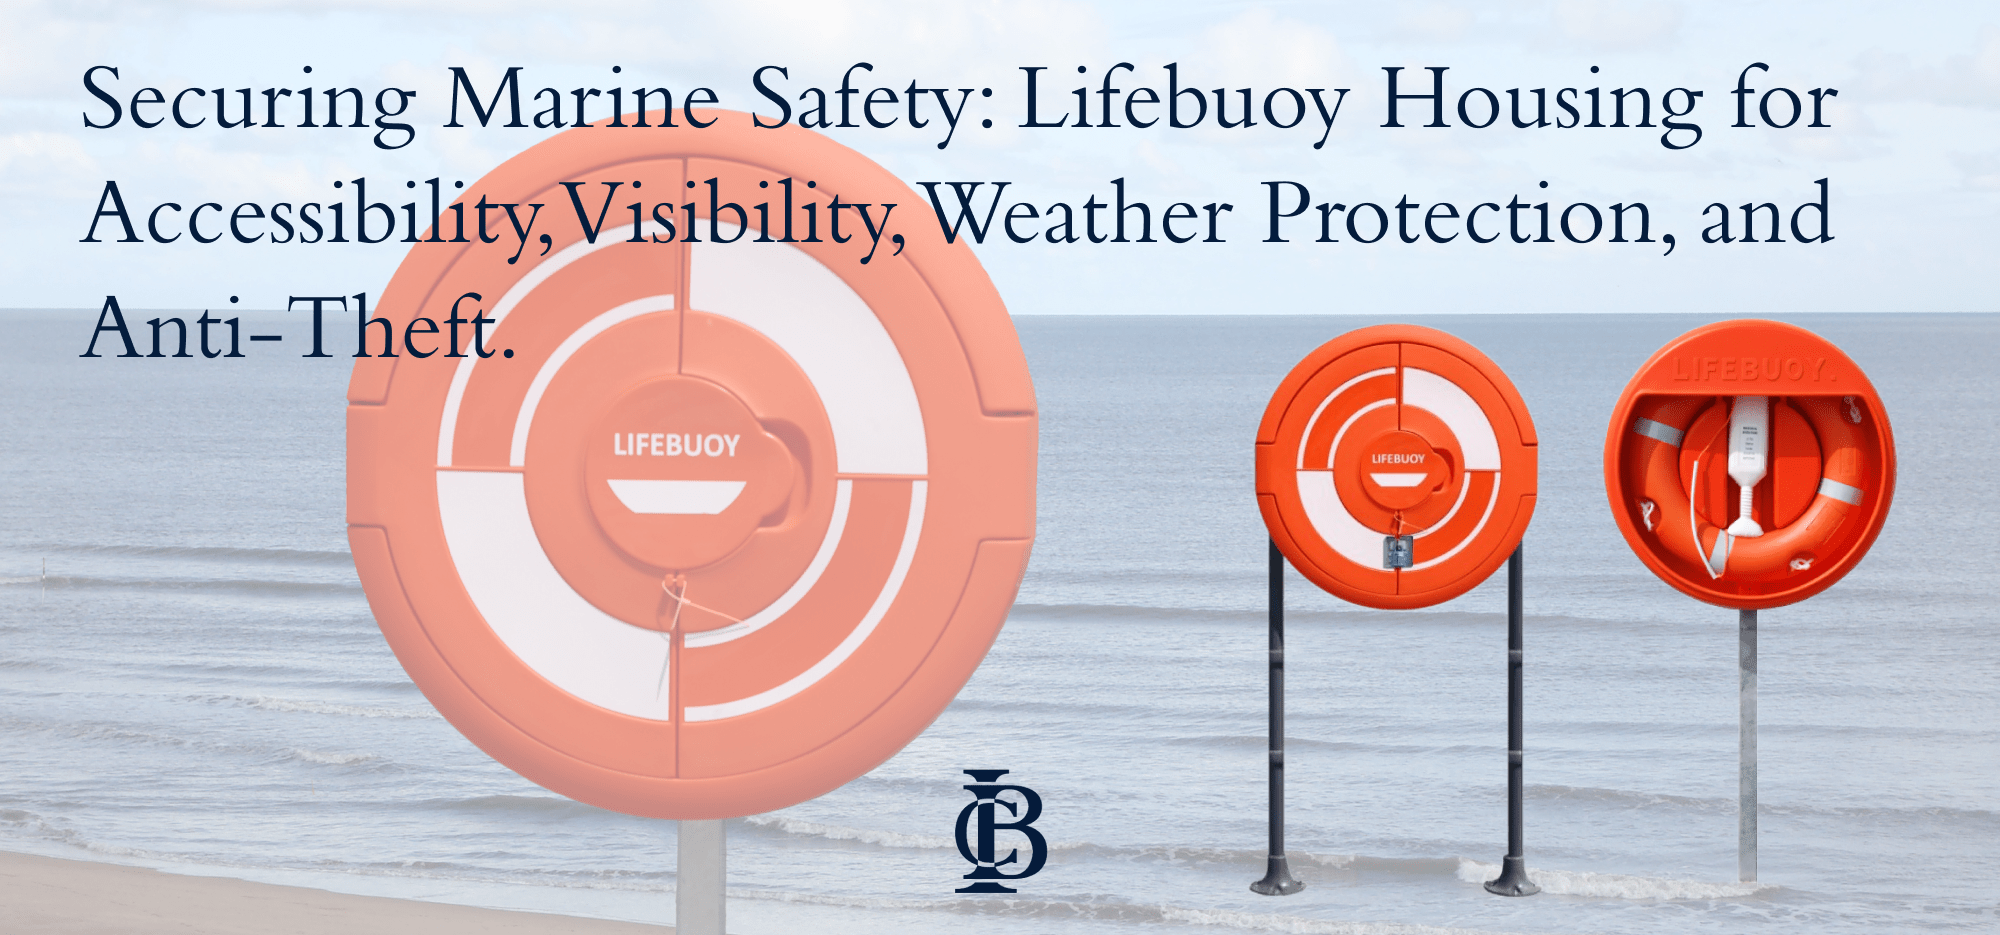 Ensuring your Marine Safety: Lifebuoy Housing for Accessibility, Visibility, Weather Protection, and Anti-Theft